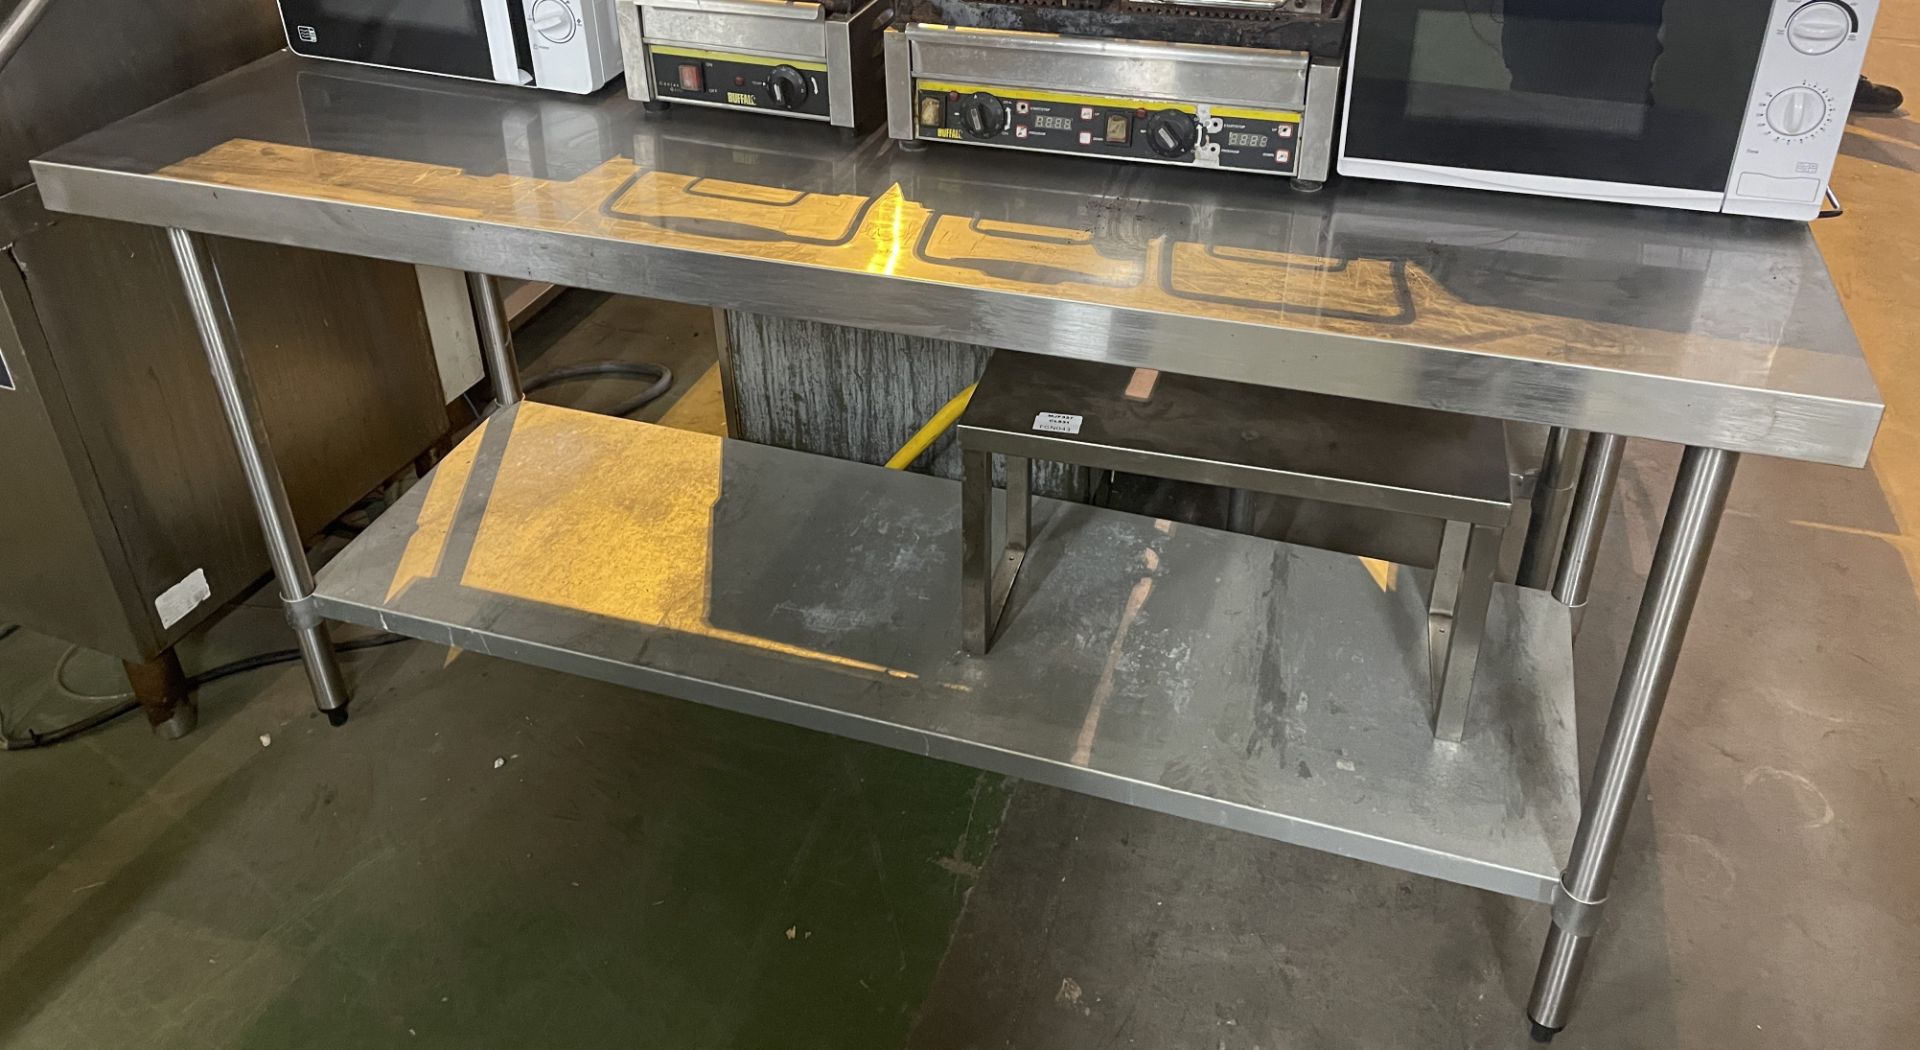 1 x Stainless Steel Prep Table With Undershelf